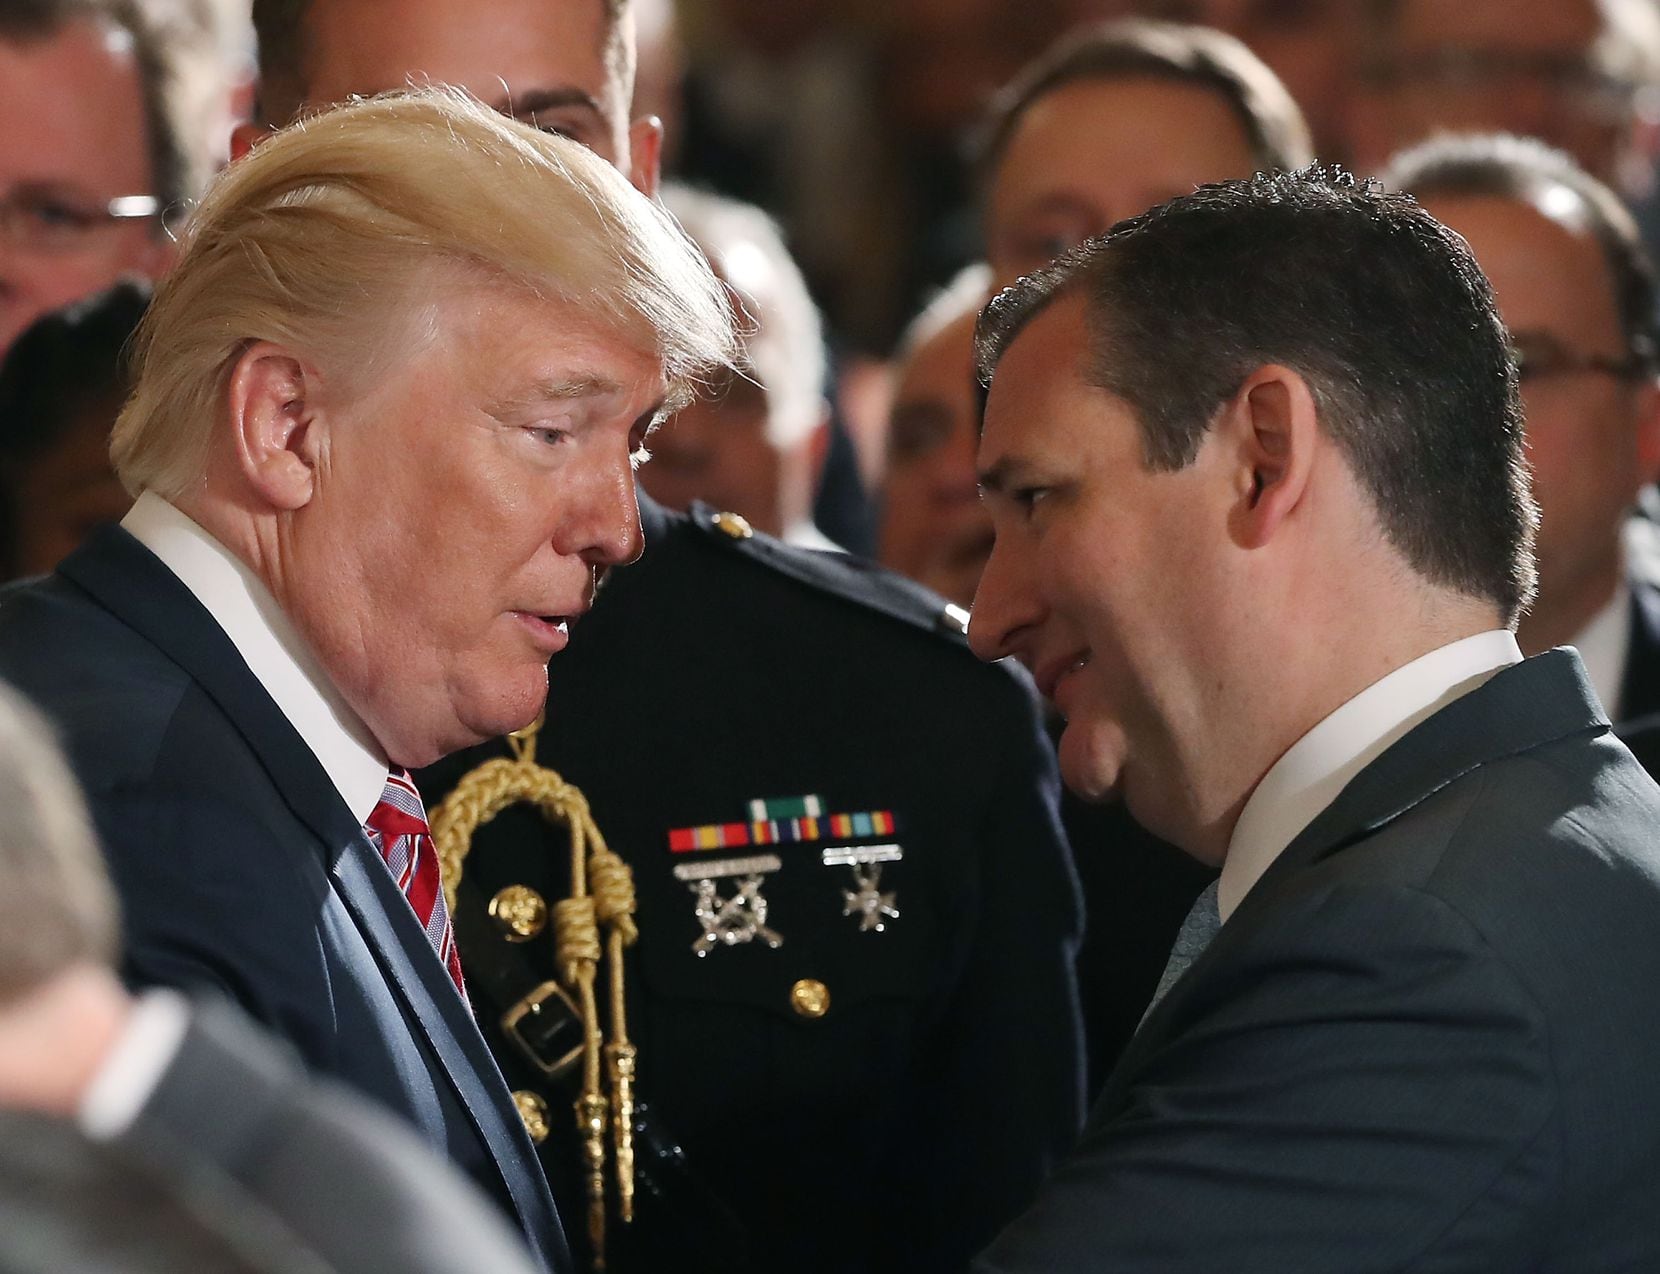 President Trump and Sen. Ted Cruz spoke in the East Room of the White House at an event on...